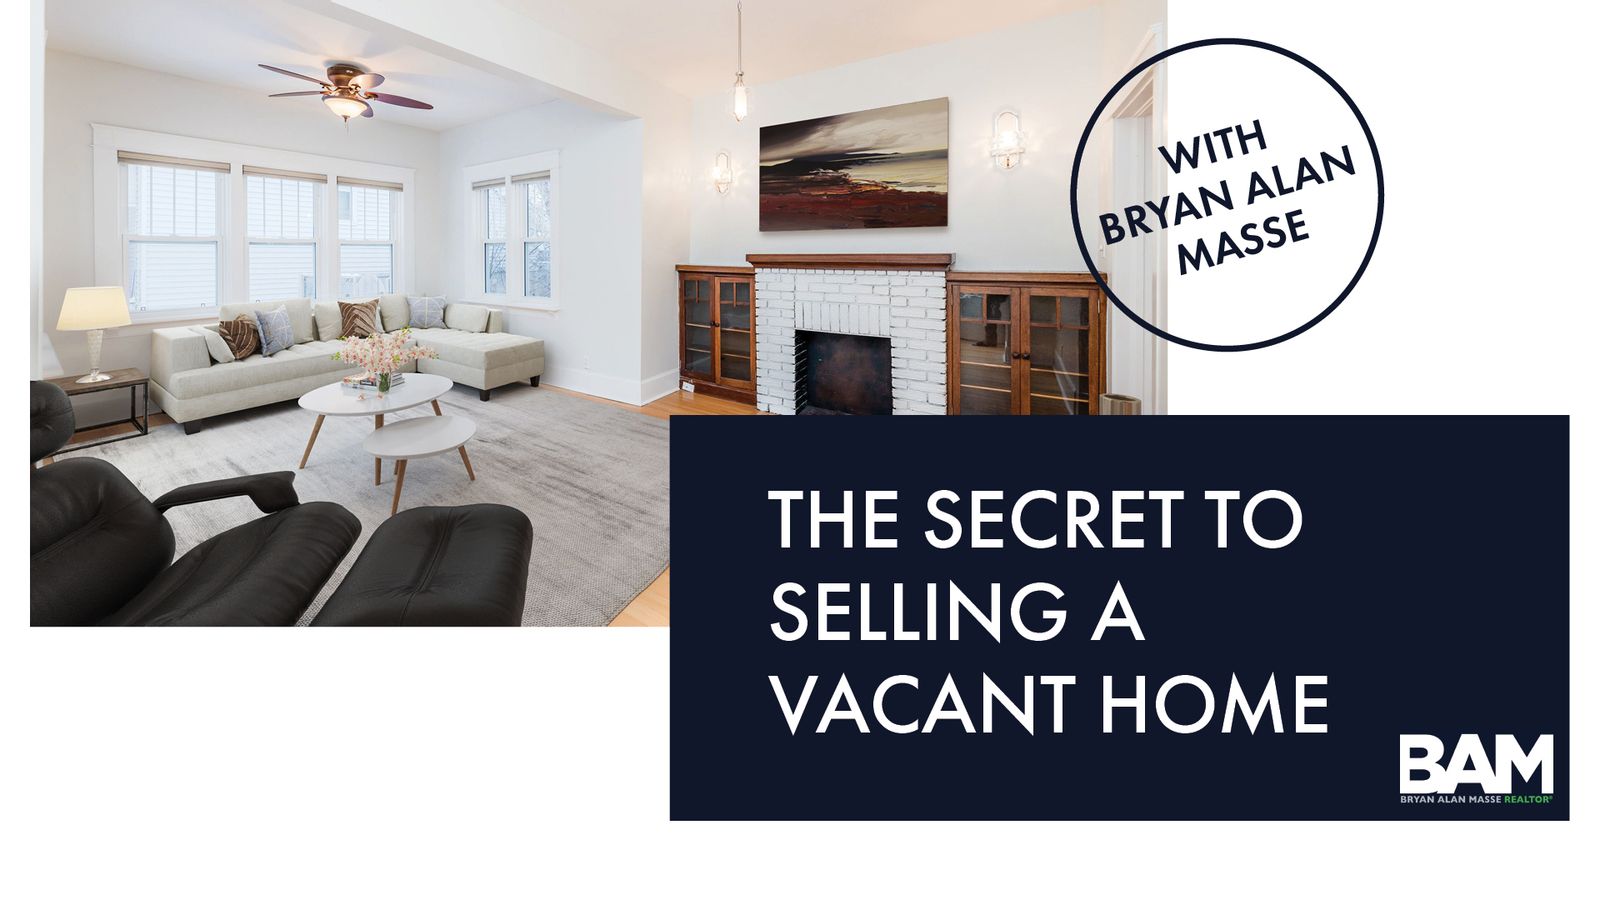 The Secret to Selling a Vacant Home